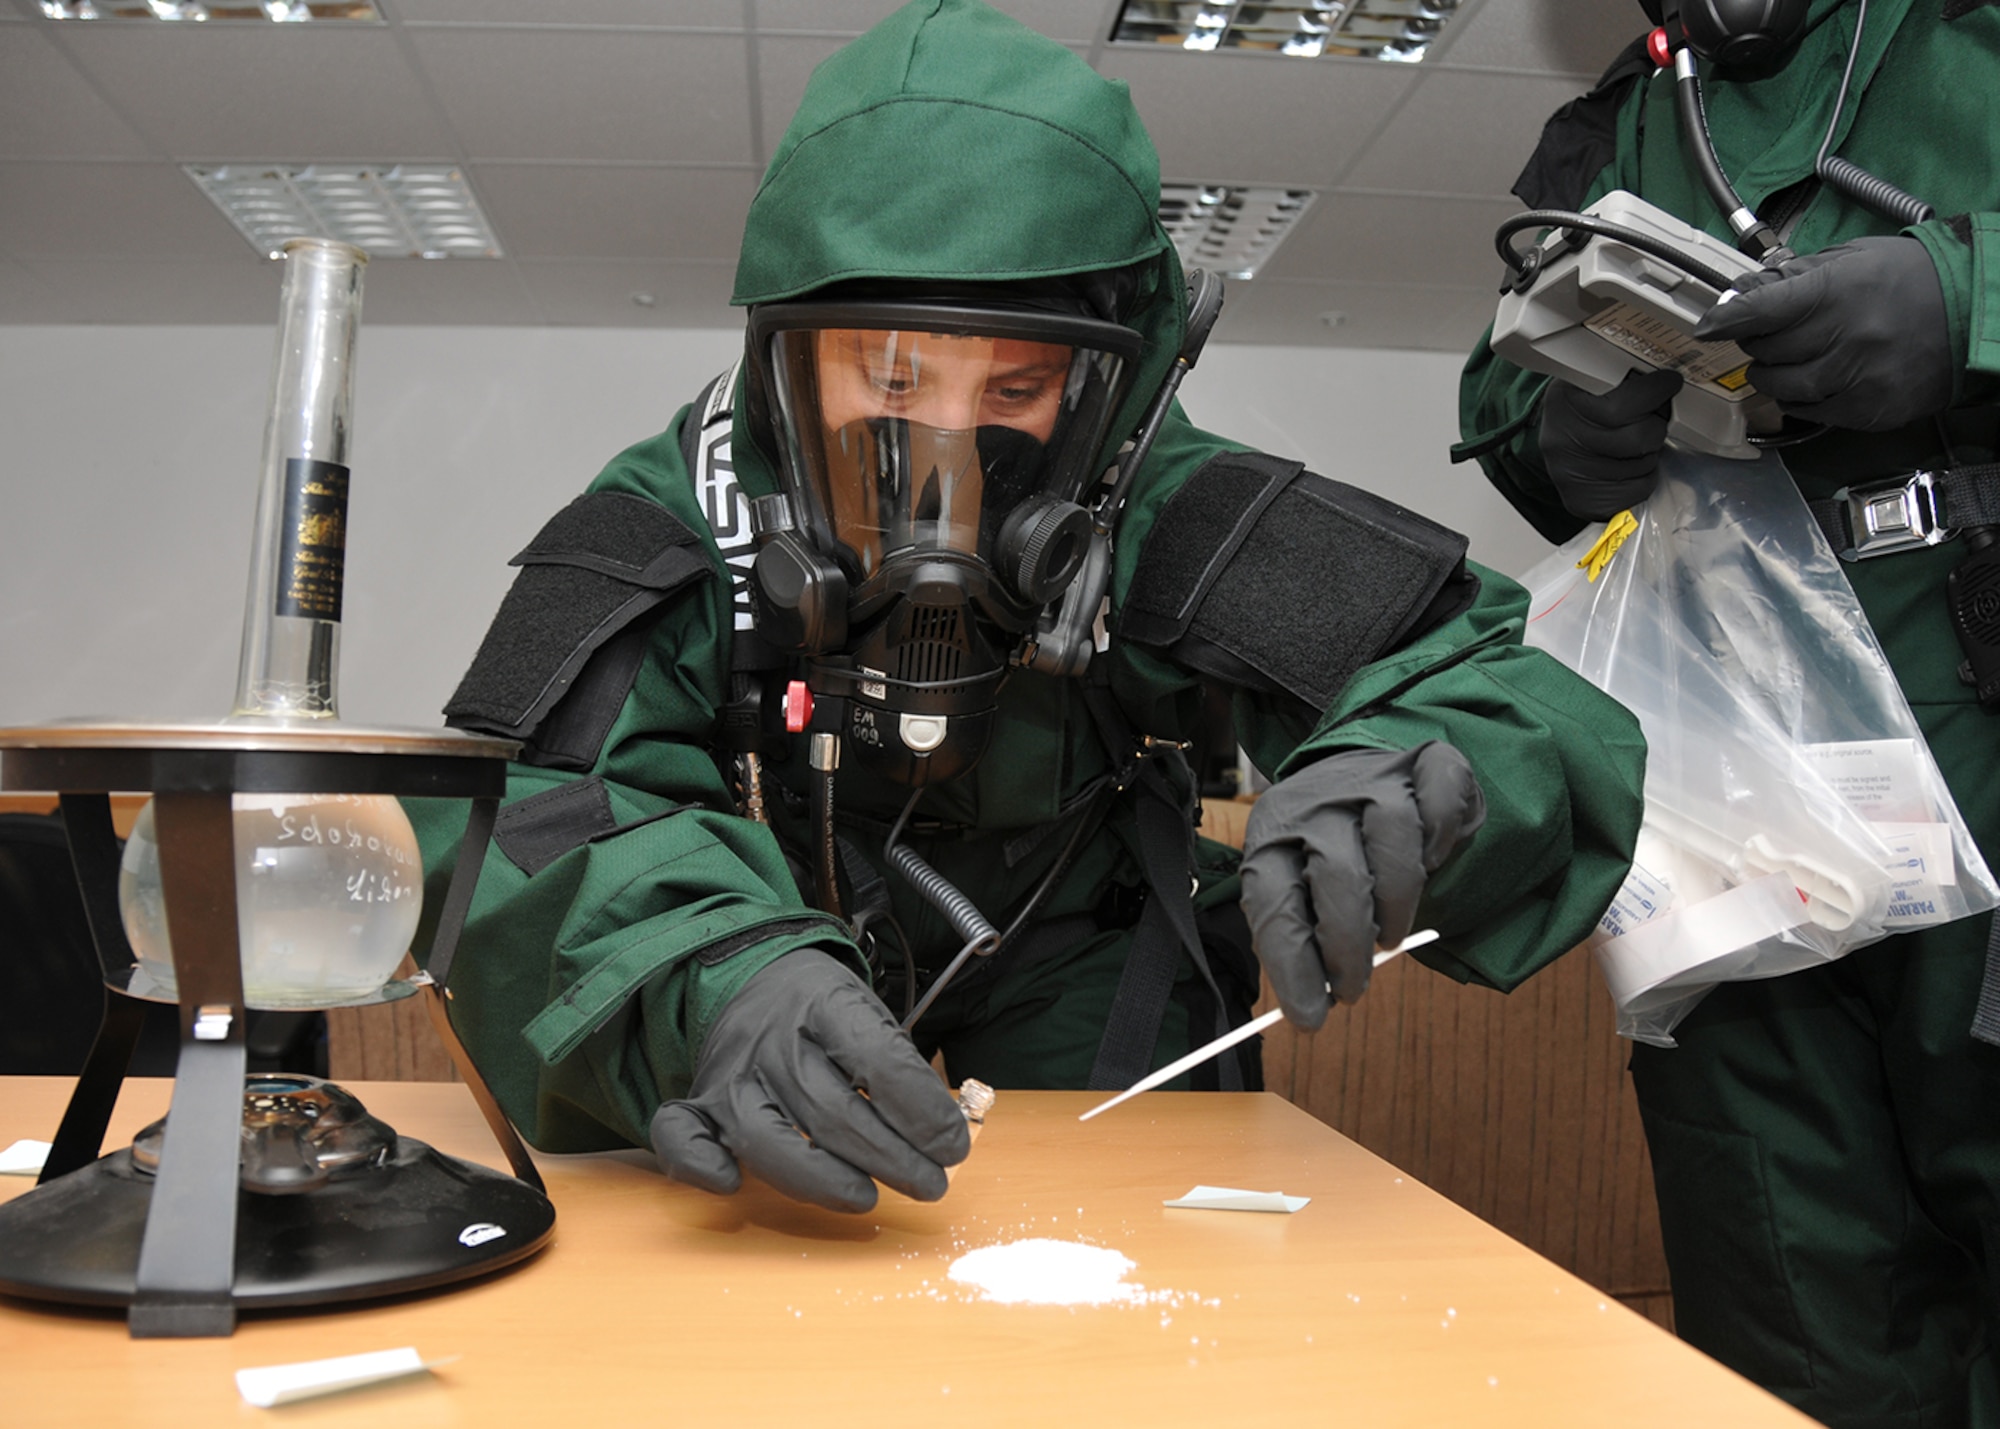 Tech. Sgt. Nicole Locke, 104th Emergency Management Flight, Barnes Air National Guard Base, Westfield, Mass., samples an unknown substance for testing during an exercise May 6, 2015, Spangdahlem Air Base, Germany. Locke is training on Active CBRNE (Chemical Biological Radiological Nuclear and High- Yield Explosives) Response with the active-duty members to enhance their Hazmat Technician Certification. This is a required training that needs to be done by the guard and the active duty. Doing the training together allows them to increase their knowledge by sharing their experiences and use different types of equipment. (U.S. Air National Guard photo by 2nd Lt. Bonnie Harper/Released) 